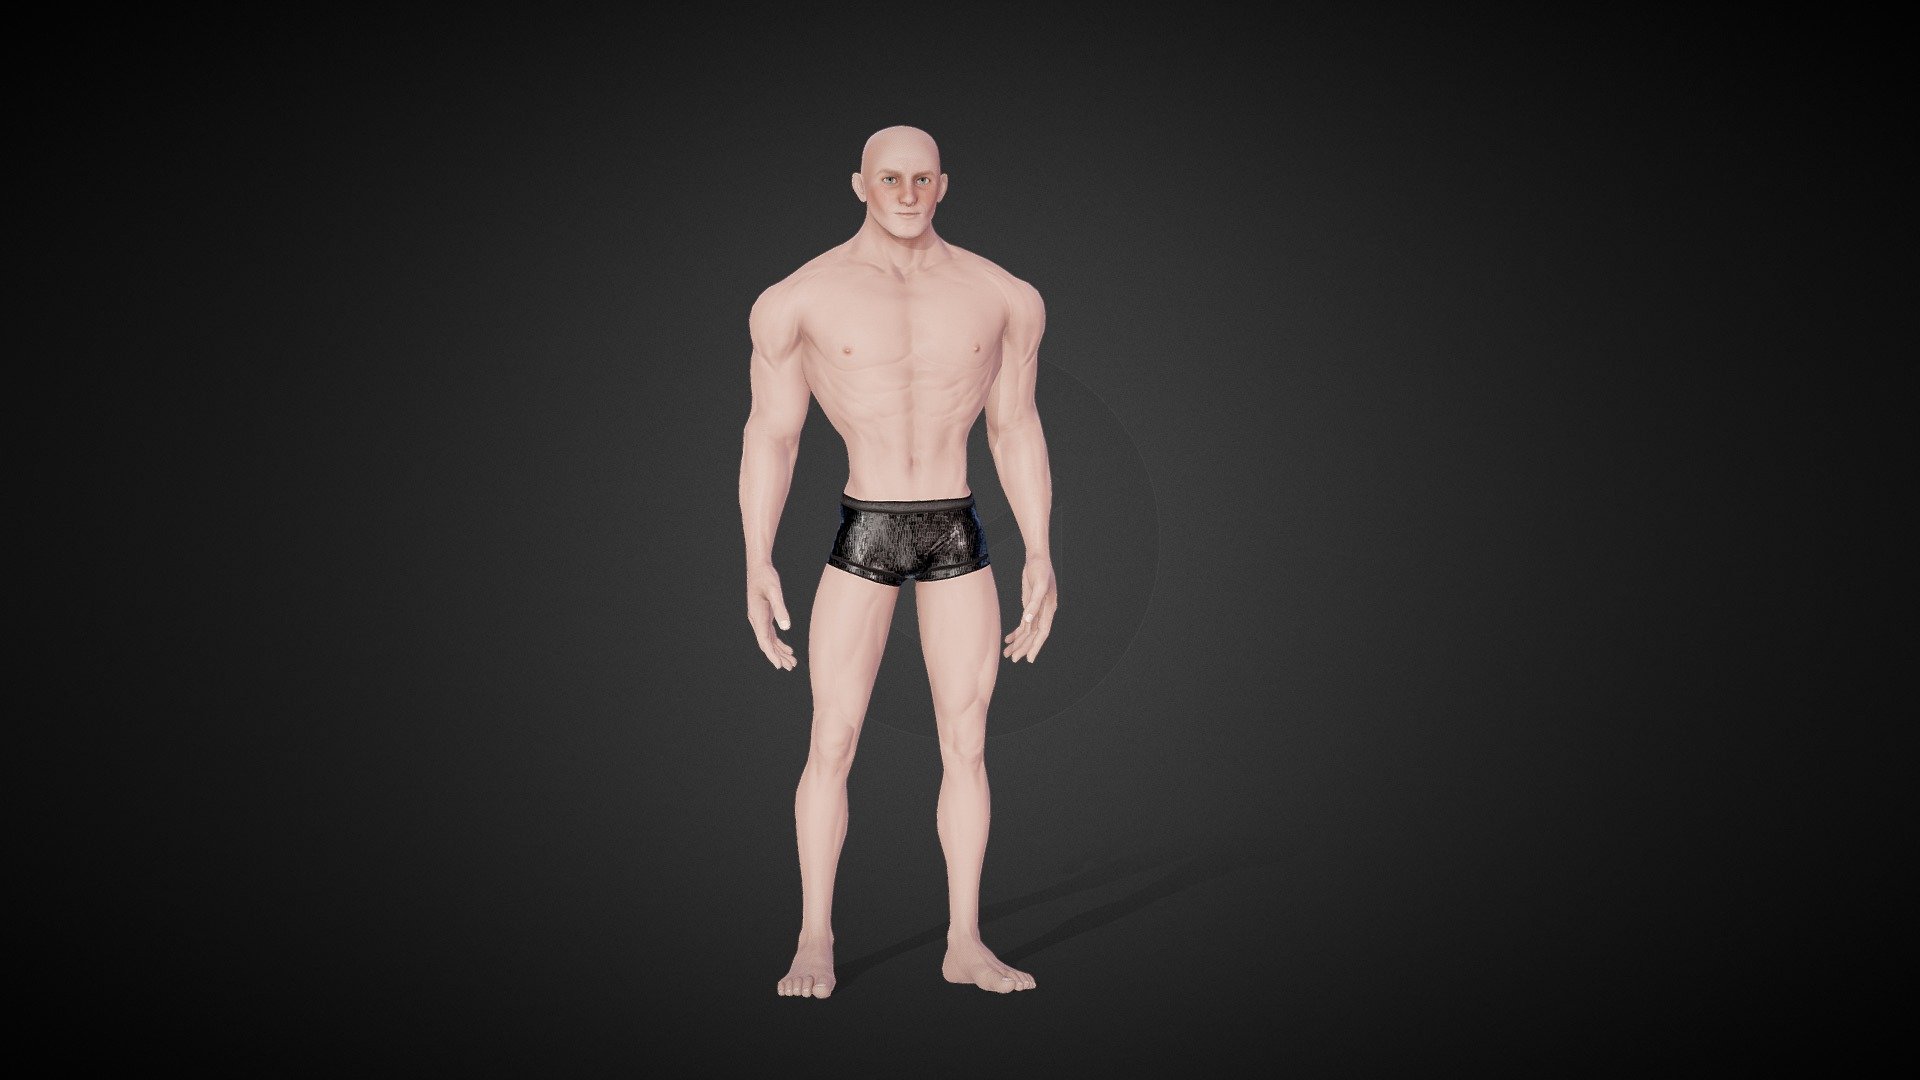 CC4 Chris (CC1 character now remastered for Character Creator 4)

Find out more here:
https://marketplace.reallusion.com/cc4-stylized-base-combo-remastered

You are looking for characters for your project? Check out all my Character Creator assets here:
https://www.reallusion.com/contentstore/featureddeveloper/profile/#!/ToKoMotion/Character%20Creator - CC4 Chris (CC1 Remastered) - 3D model by ToKoMotion 3d model